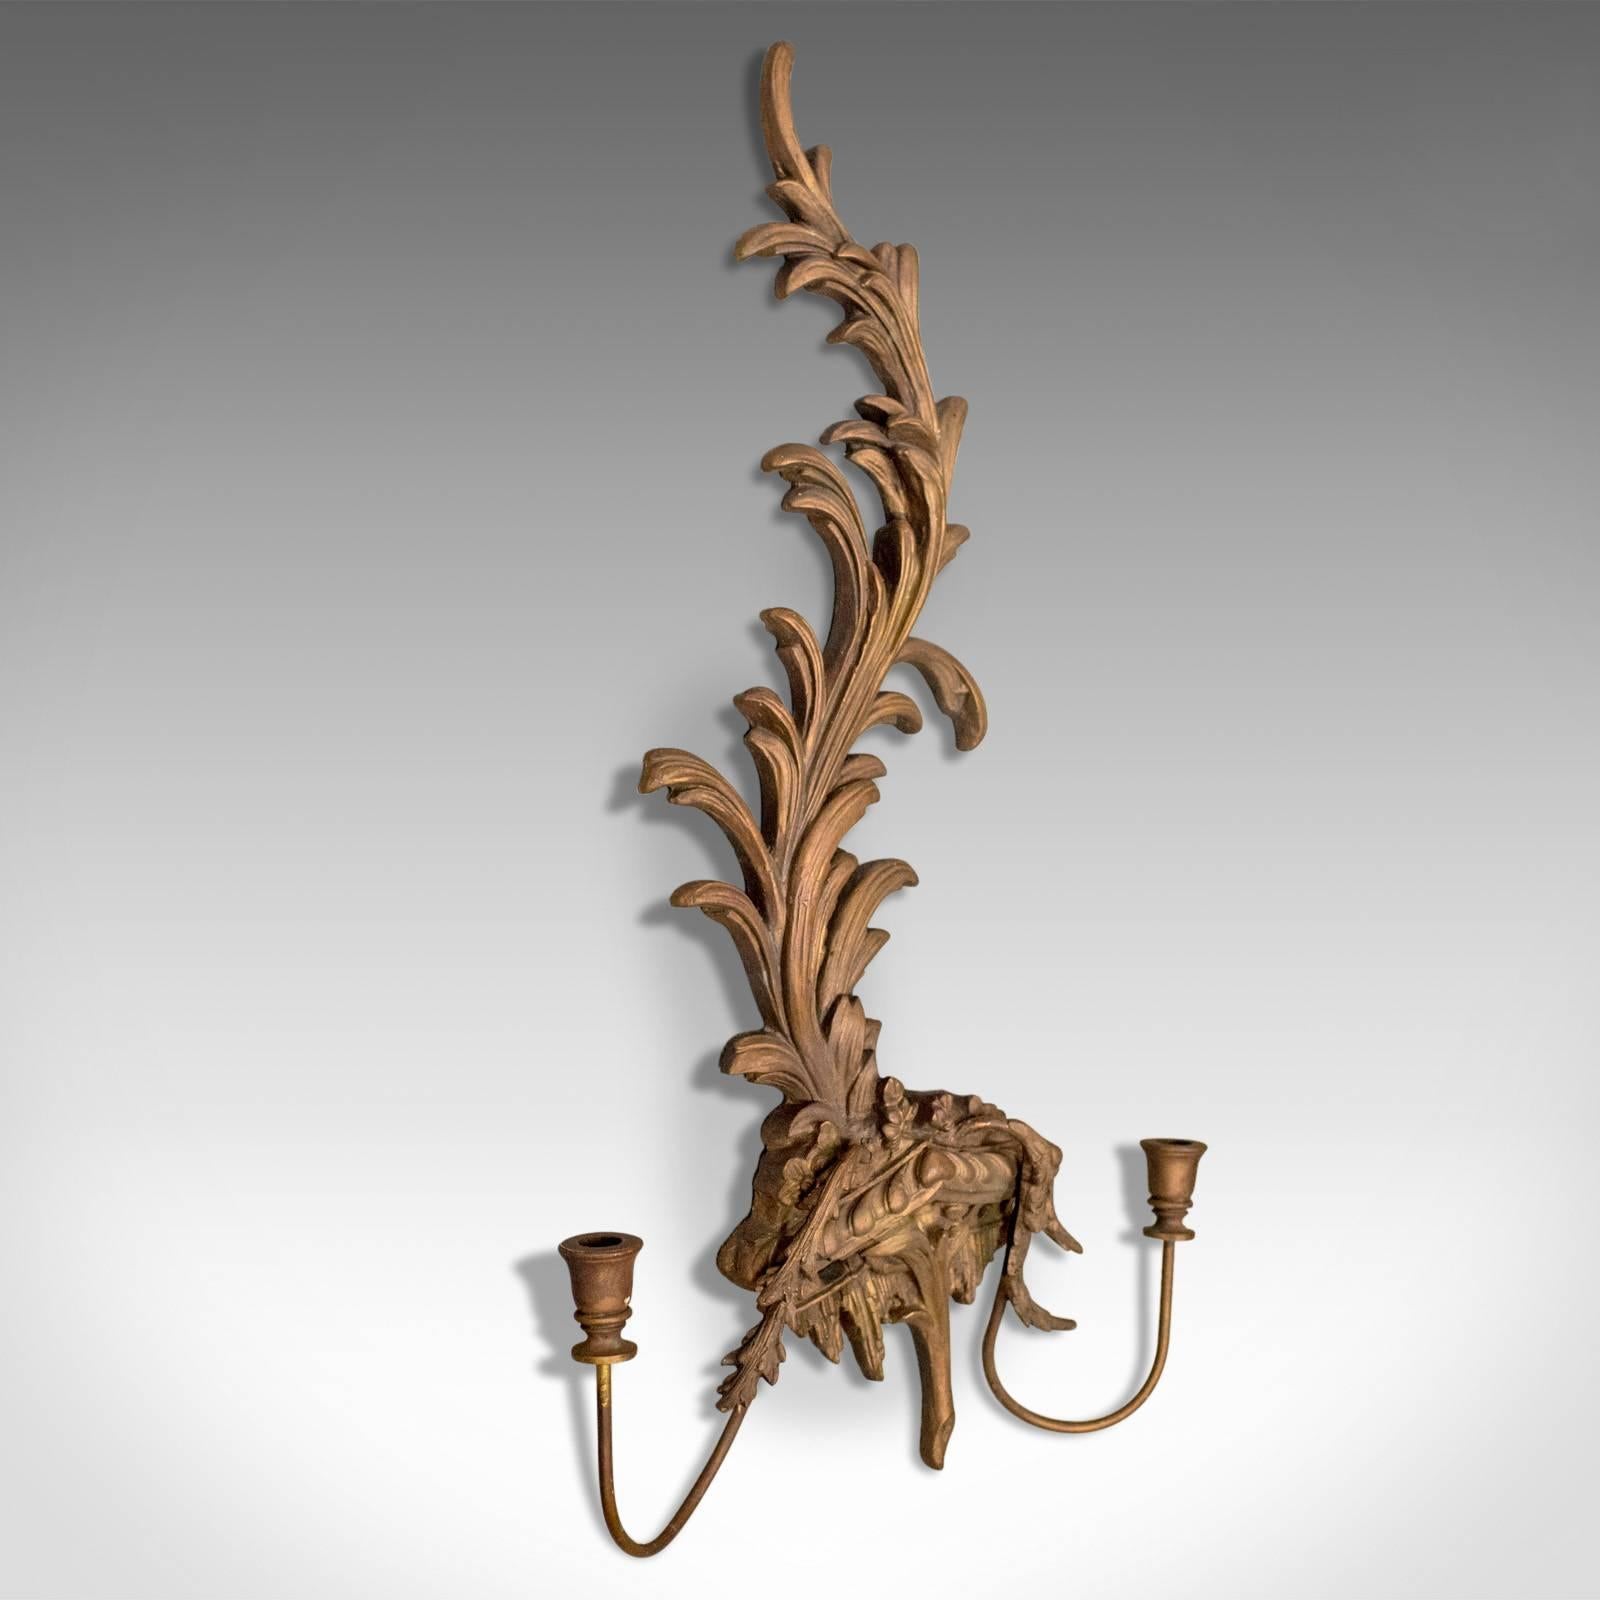 This is a large vintage wall sconce, a 20th century, Rococo revival, girandole candle stand.

Long and sinuous foliate form
Attractive wall hanging candle sconce
Of natural form finished in a golden lustre
Twin candle branches
Easily mounted